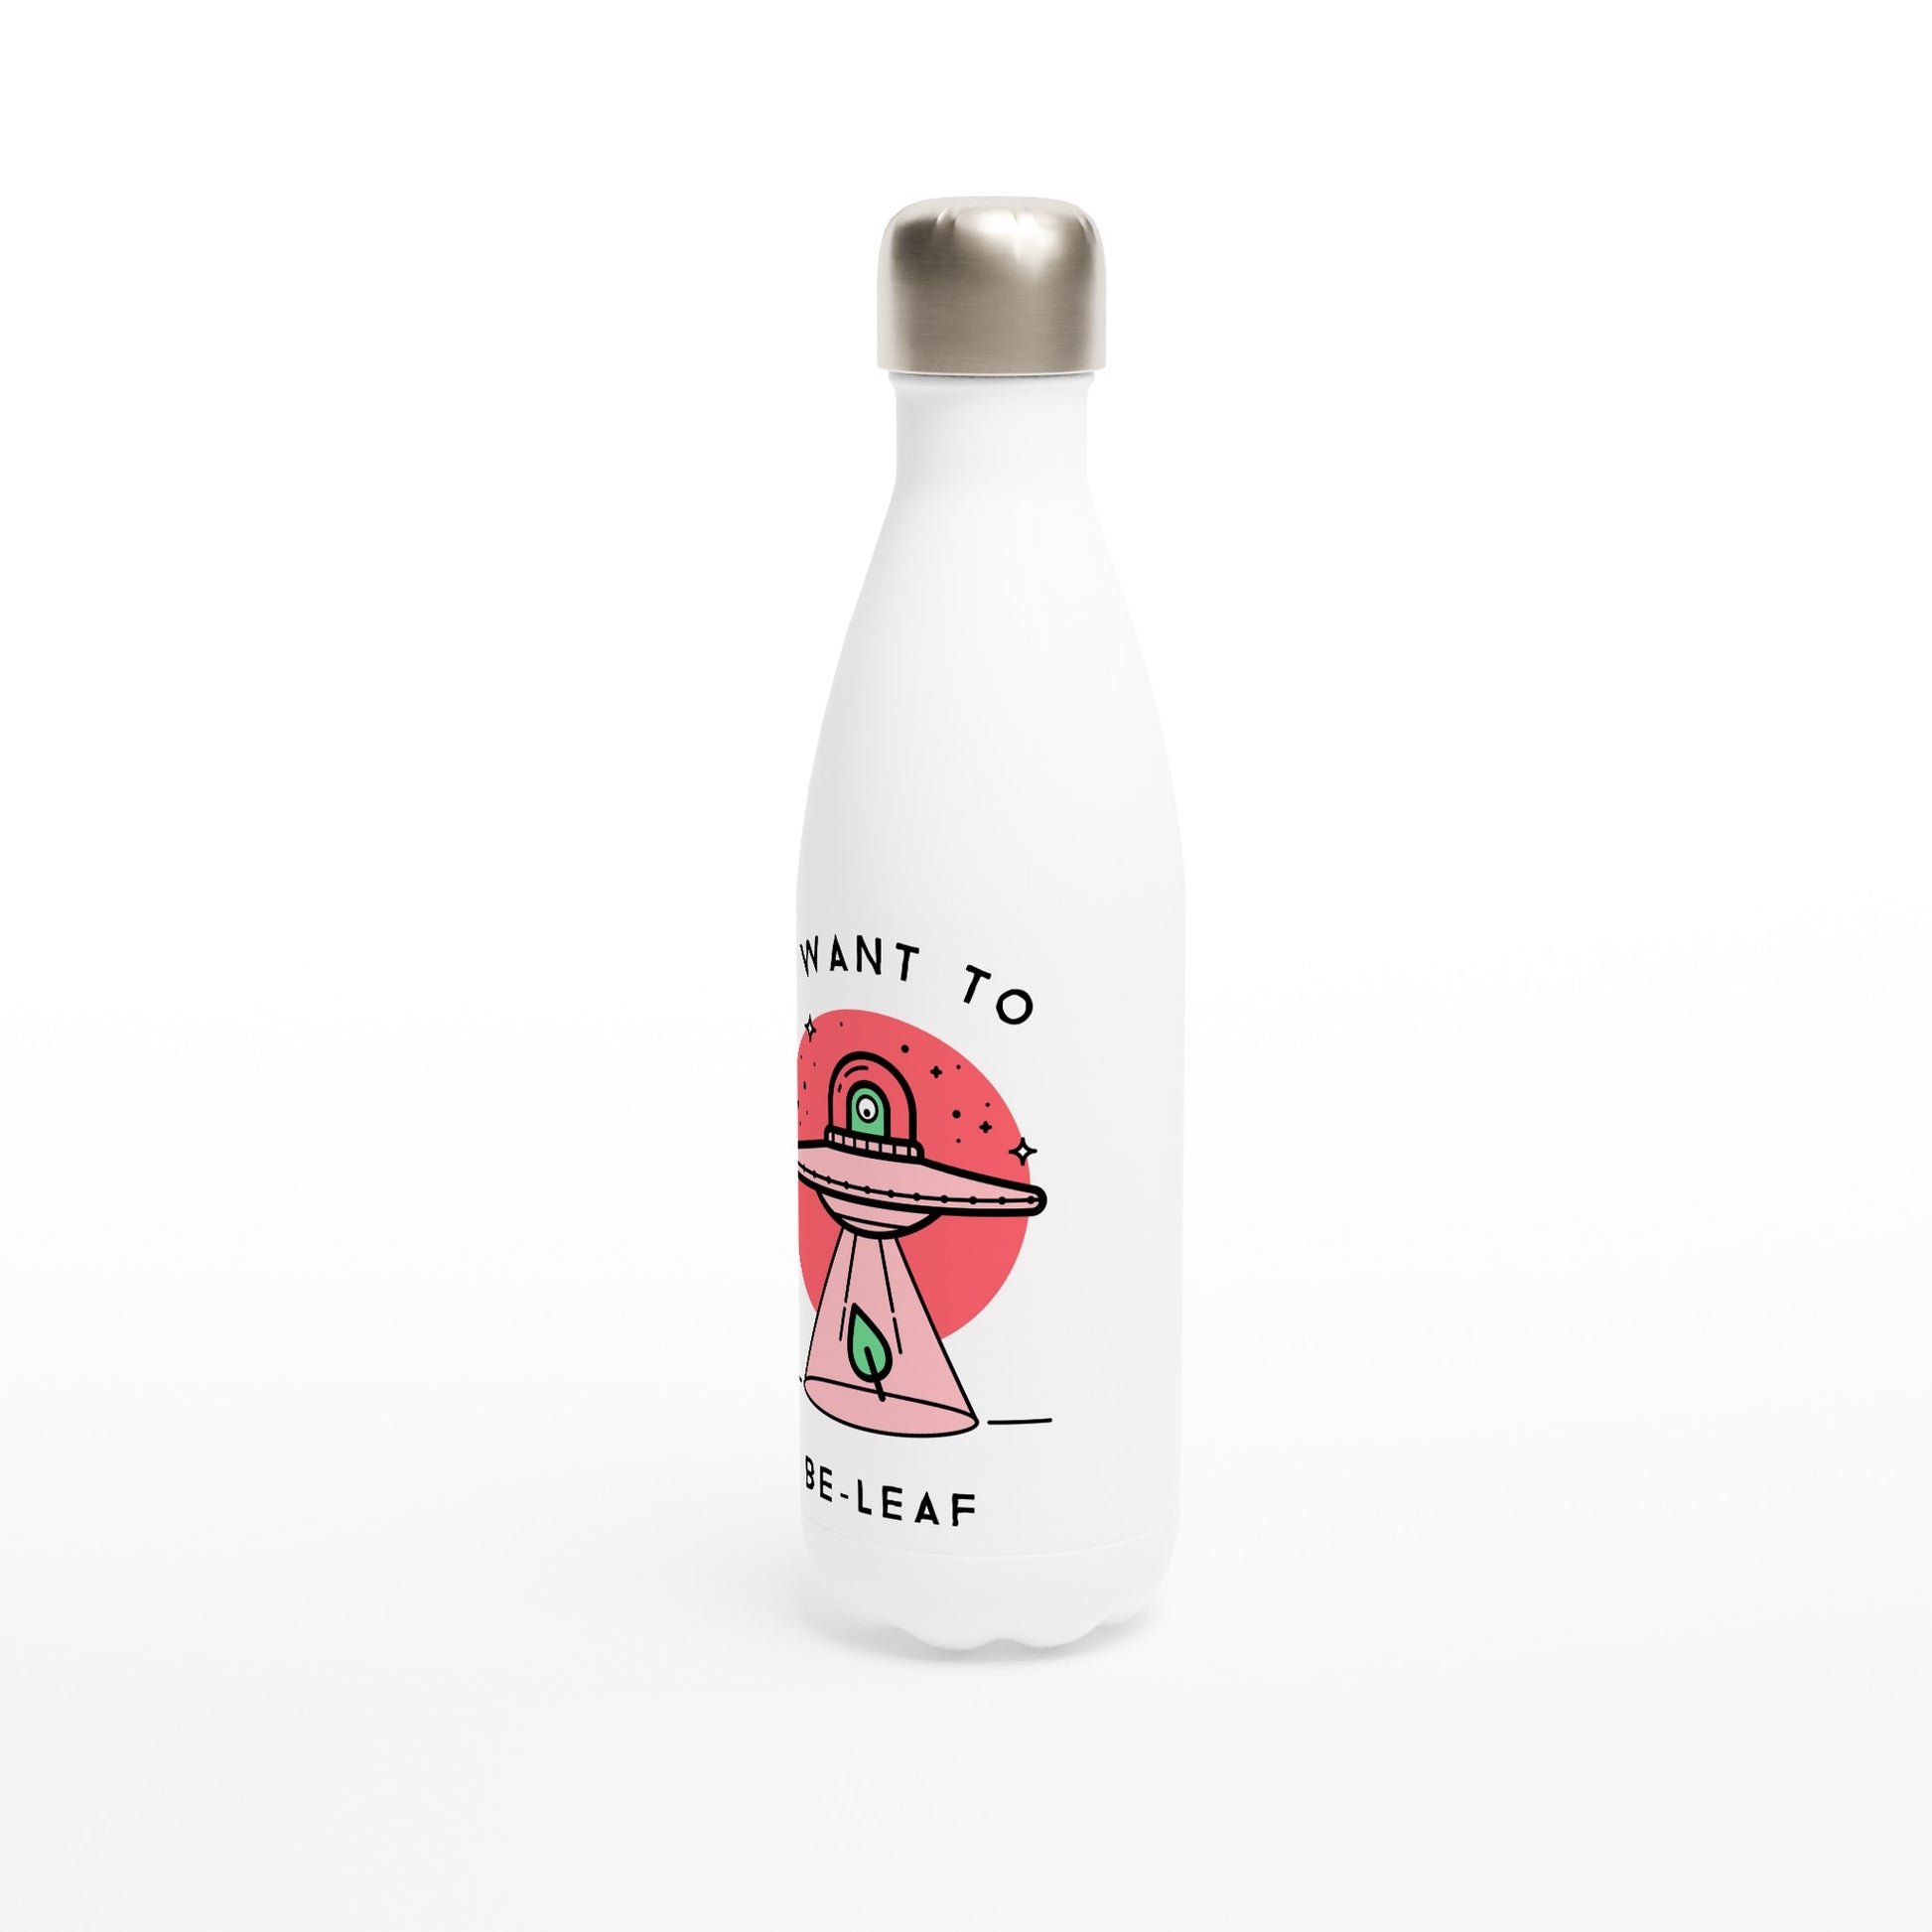 I Want To Be-Leaf, UFO - White 17oz Stainless Steel Water Bottle White Water Bottle Sci Fi